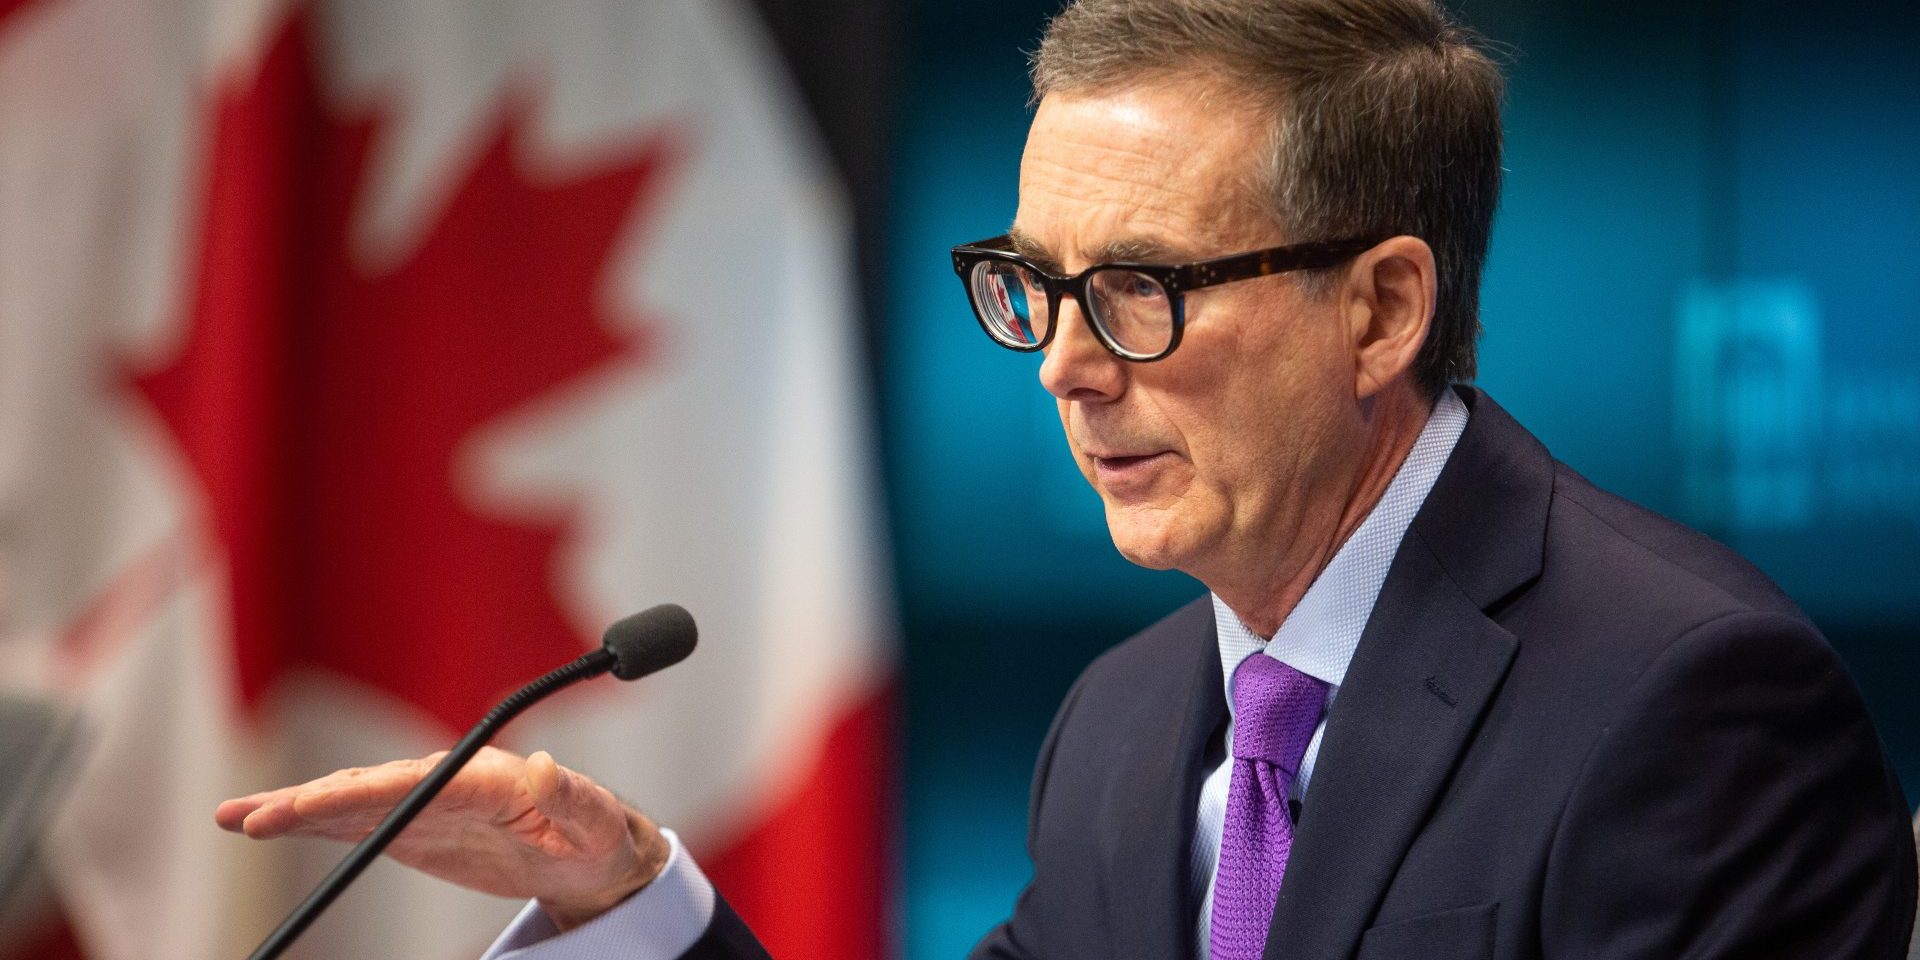 Bank of Canada raises key rate by 25 bps to 4.75% vs. 4.5% est.